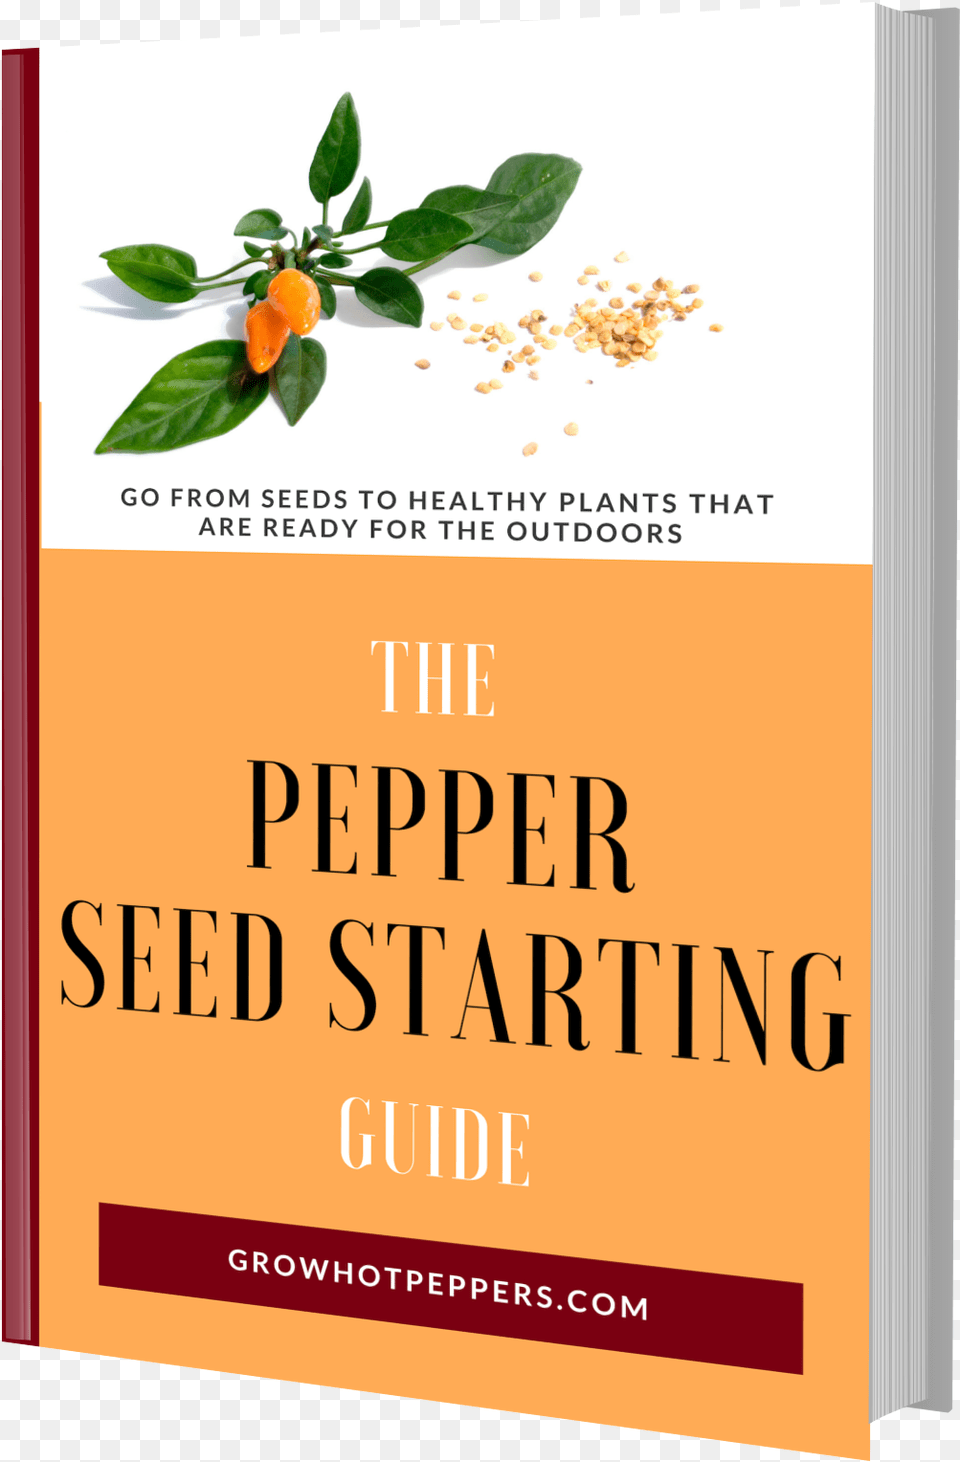 The Pepper Seed Starting Guide 3d Book Image Herbal, Herbs, Plant, Publication, Advertisement Png